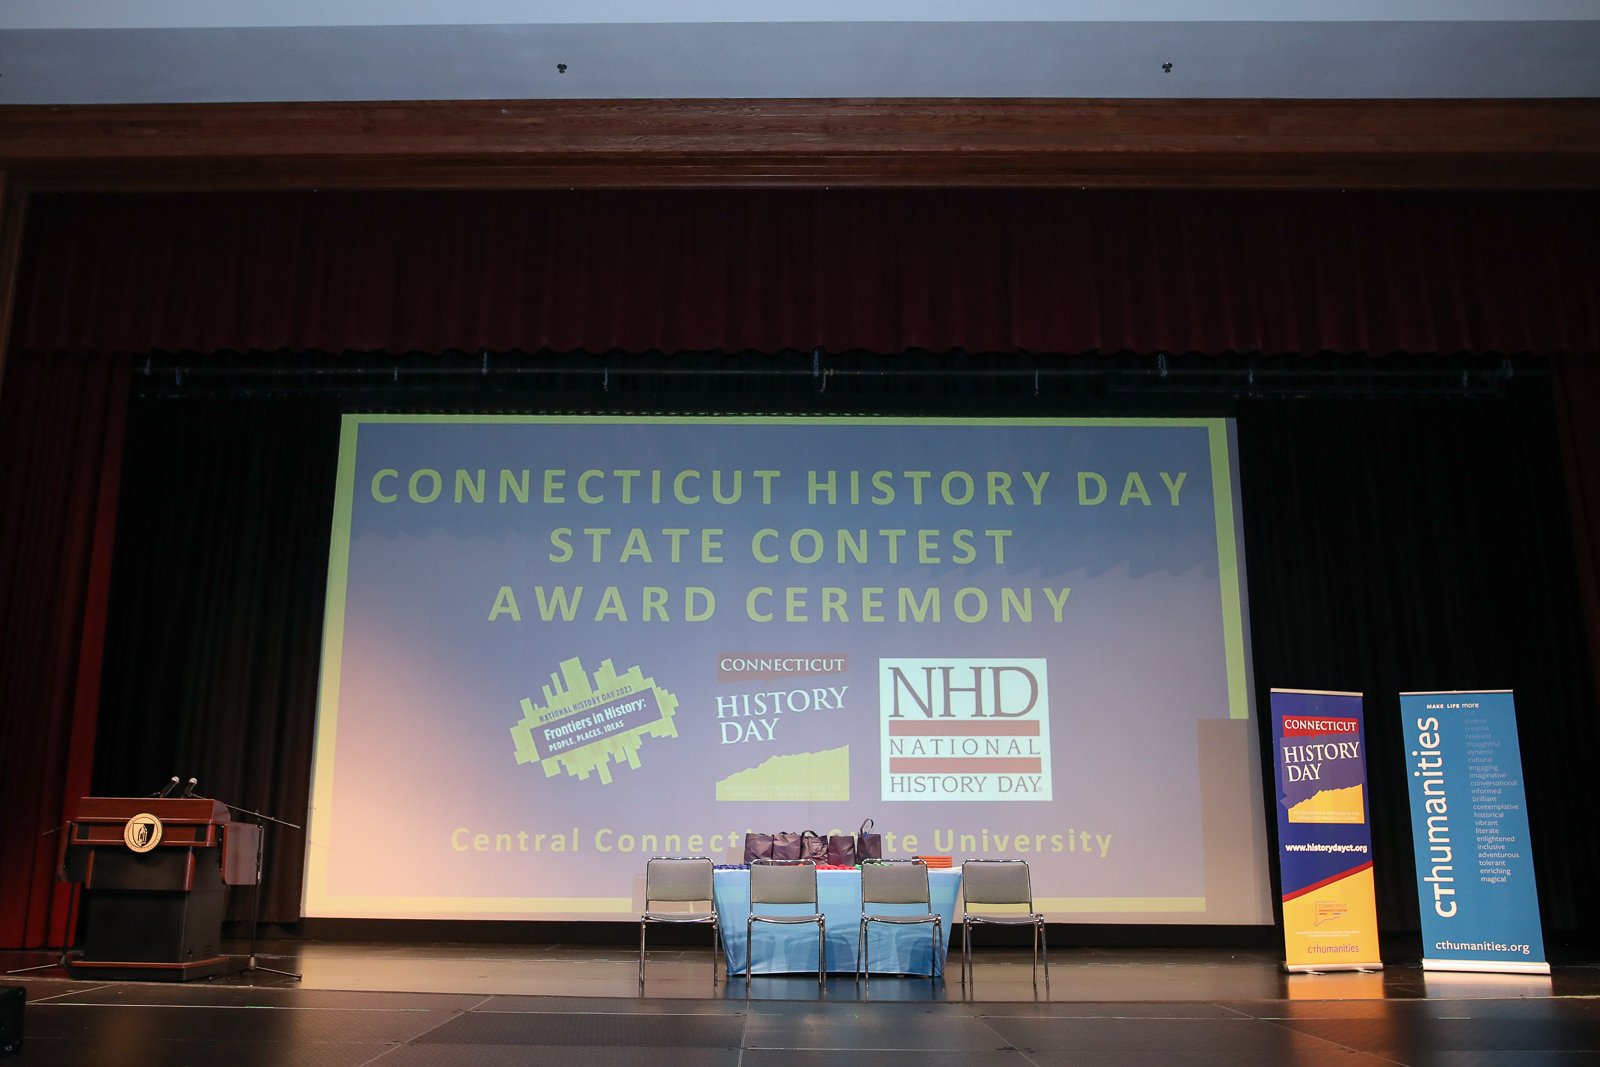 Connecticut History Day